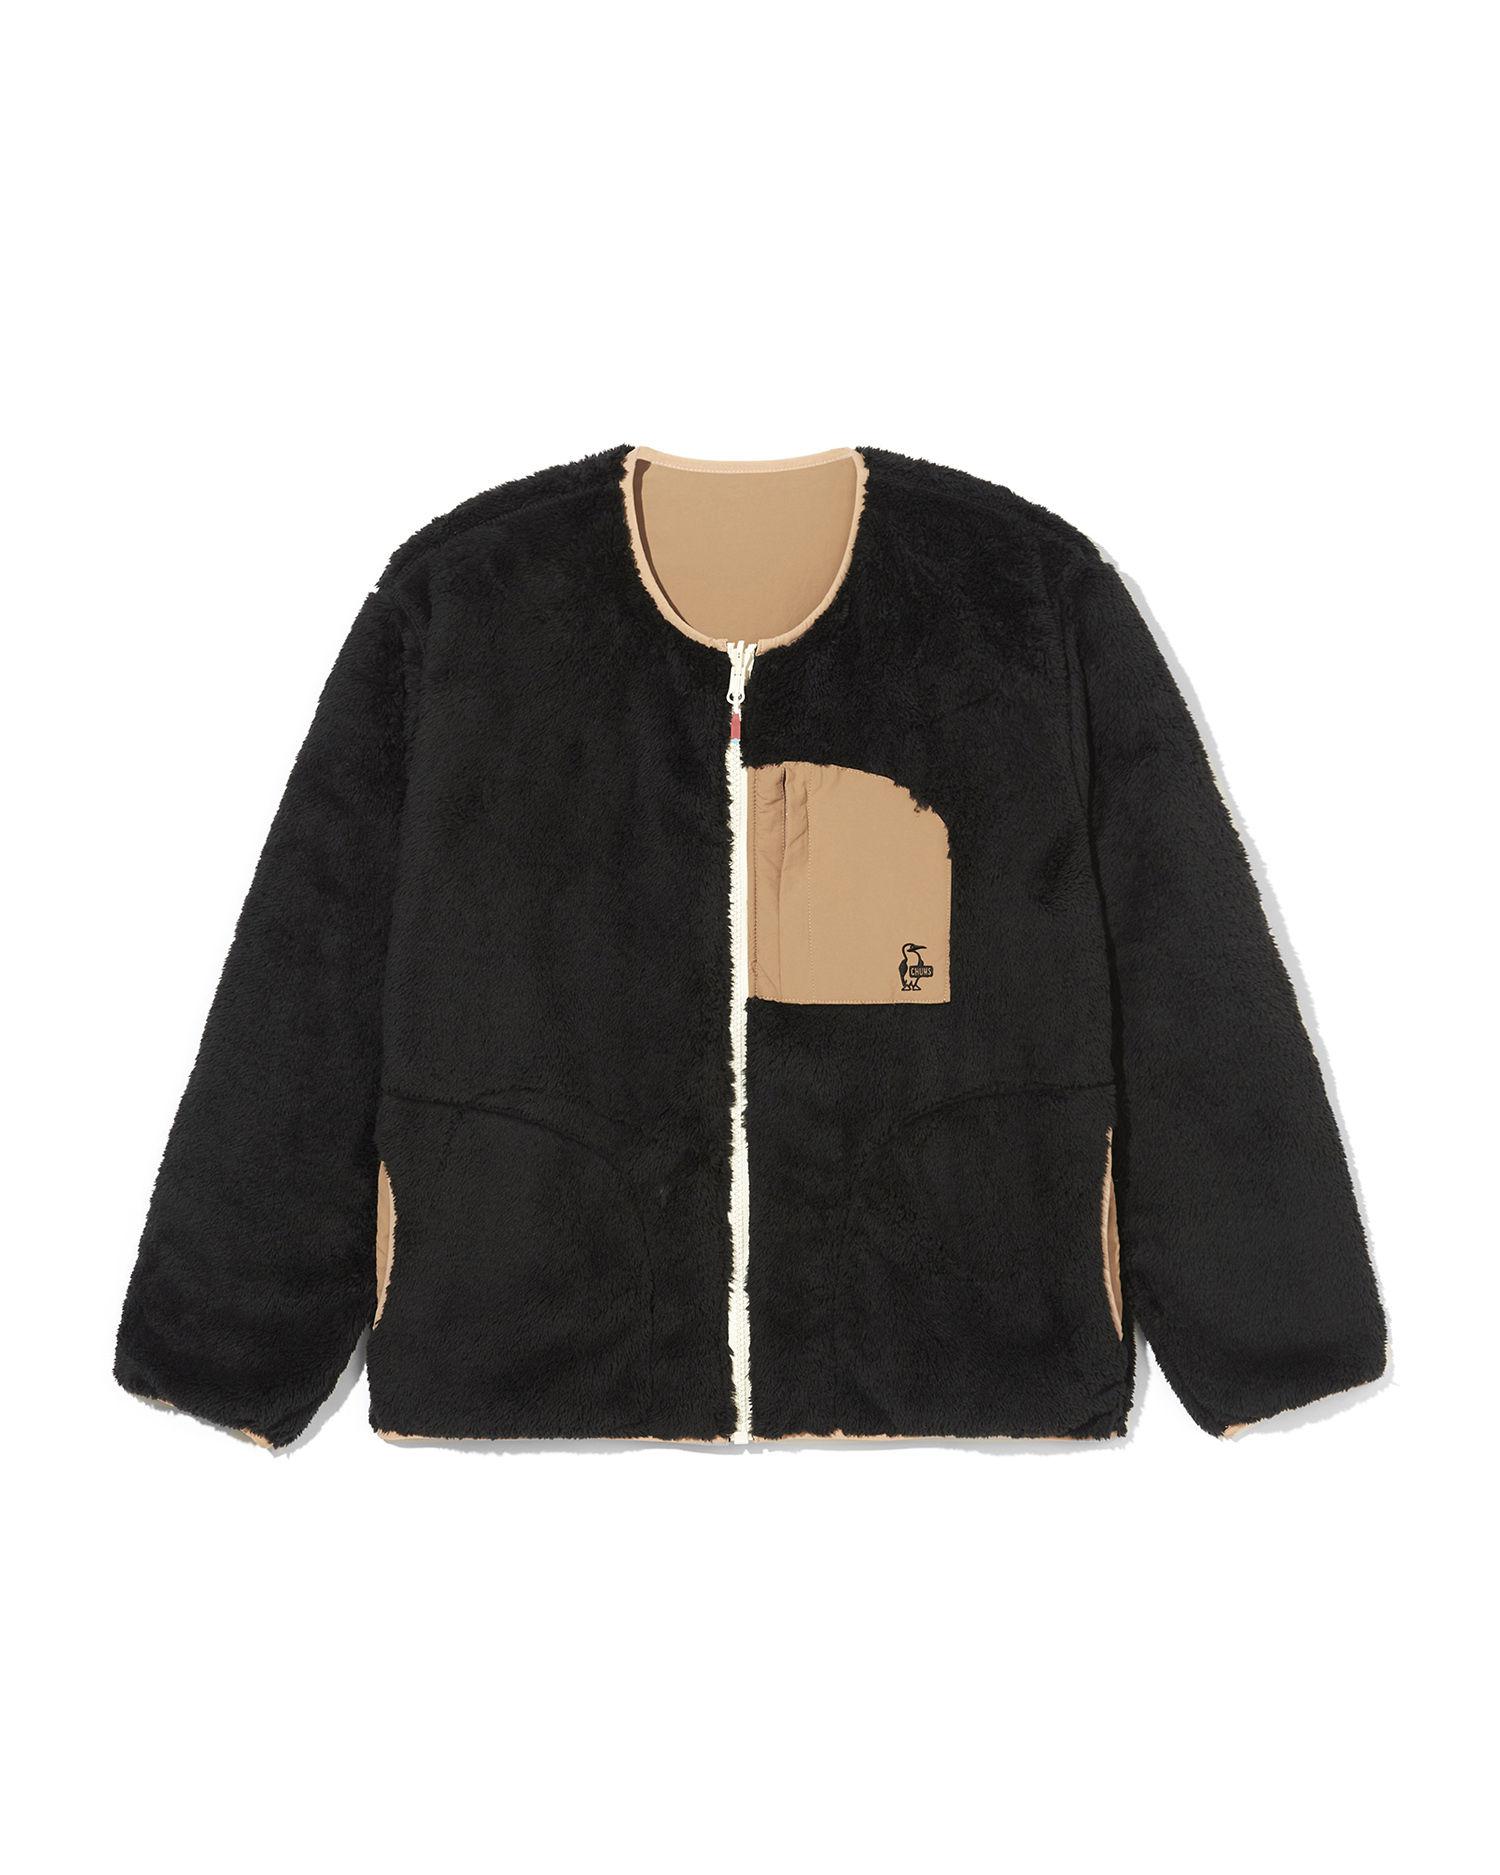 Reversible fleece jacket by CHUMS